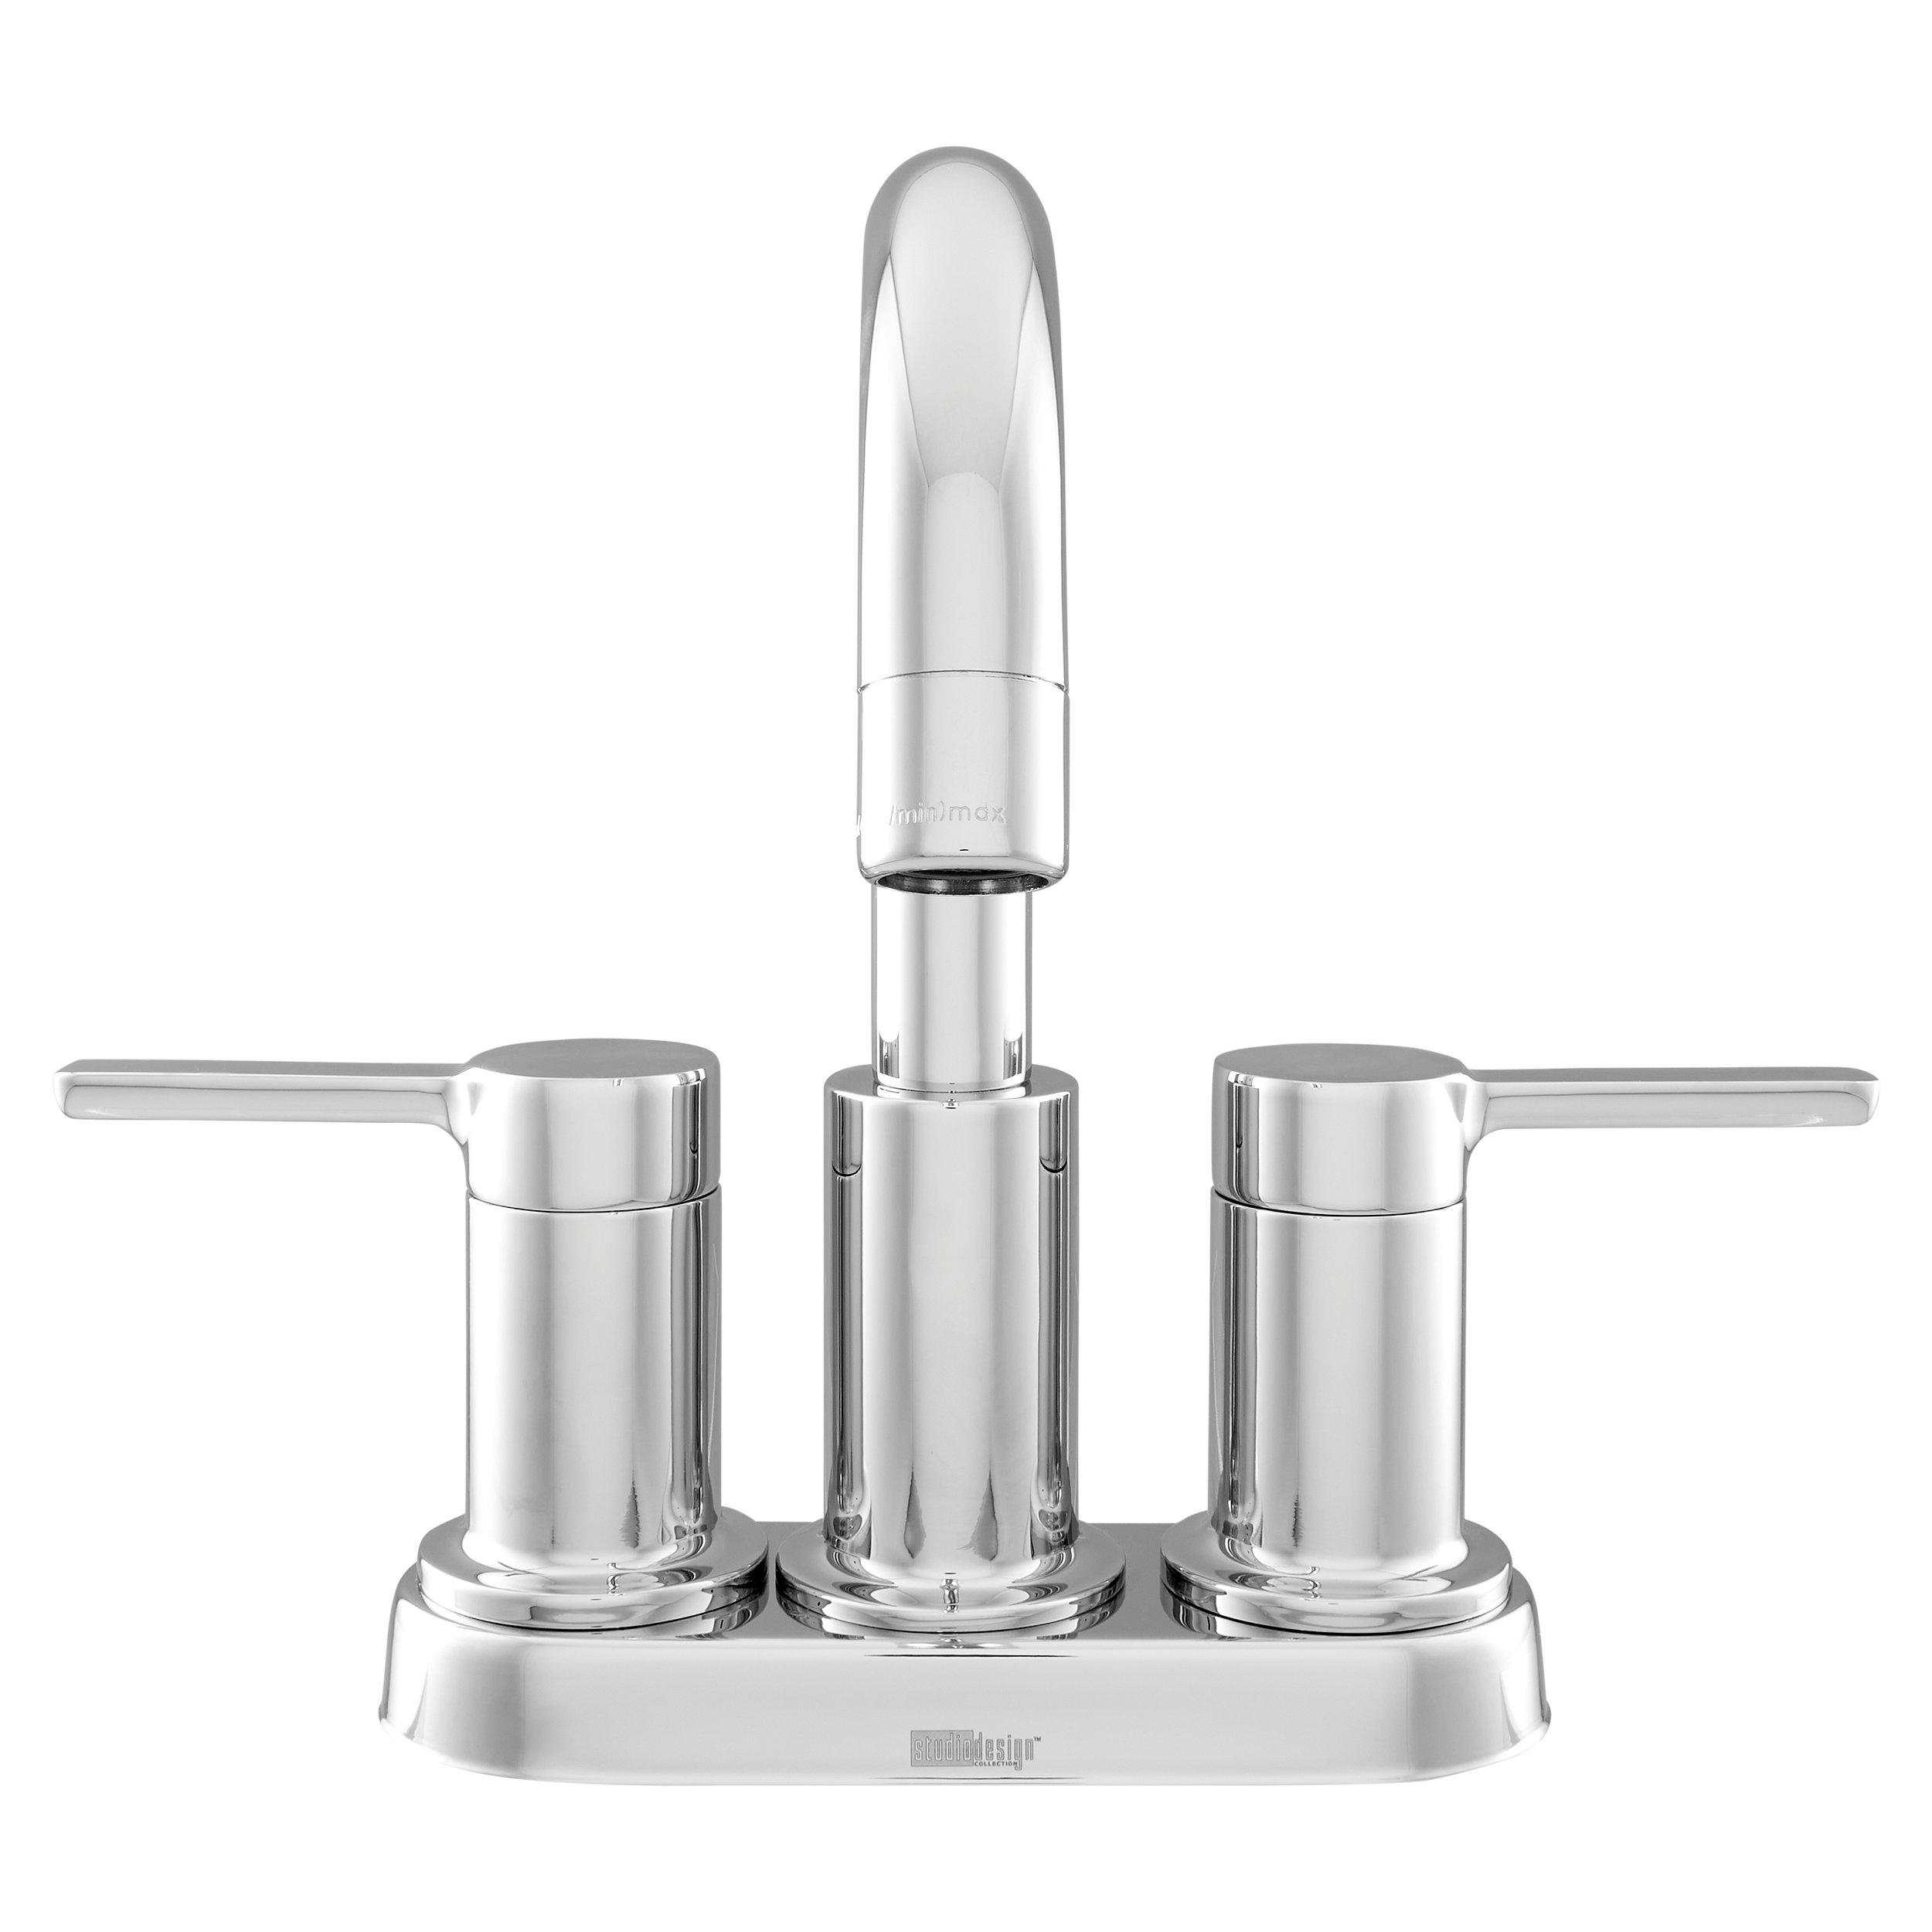 Rhiver 4 in. Center Set Chrome Faucet